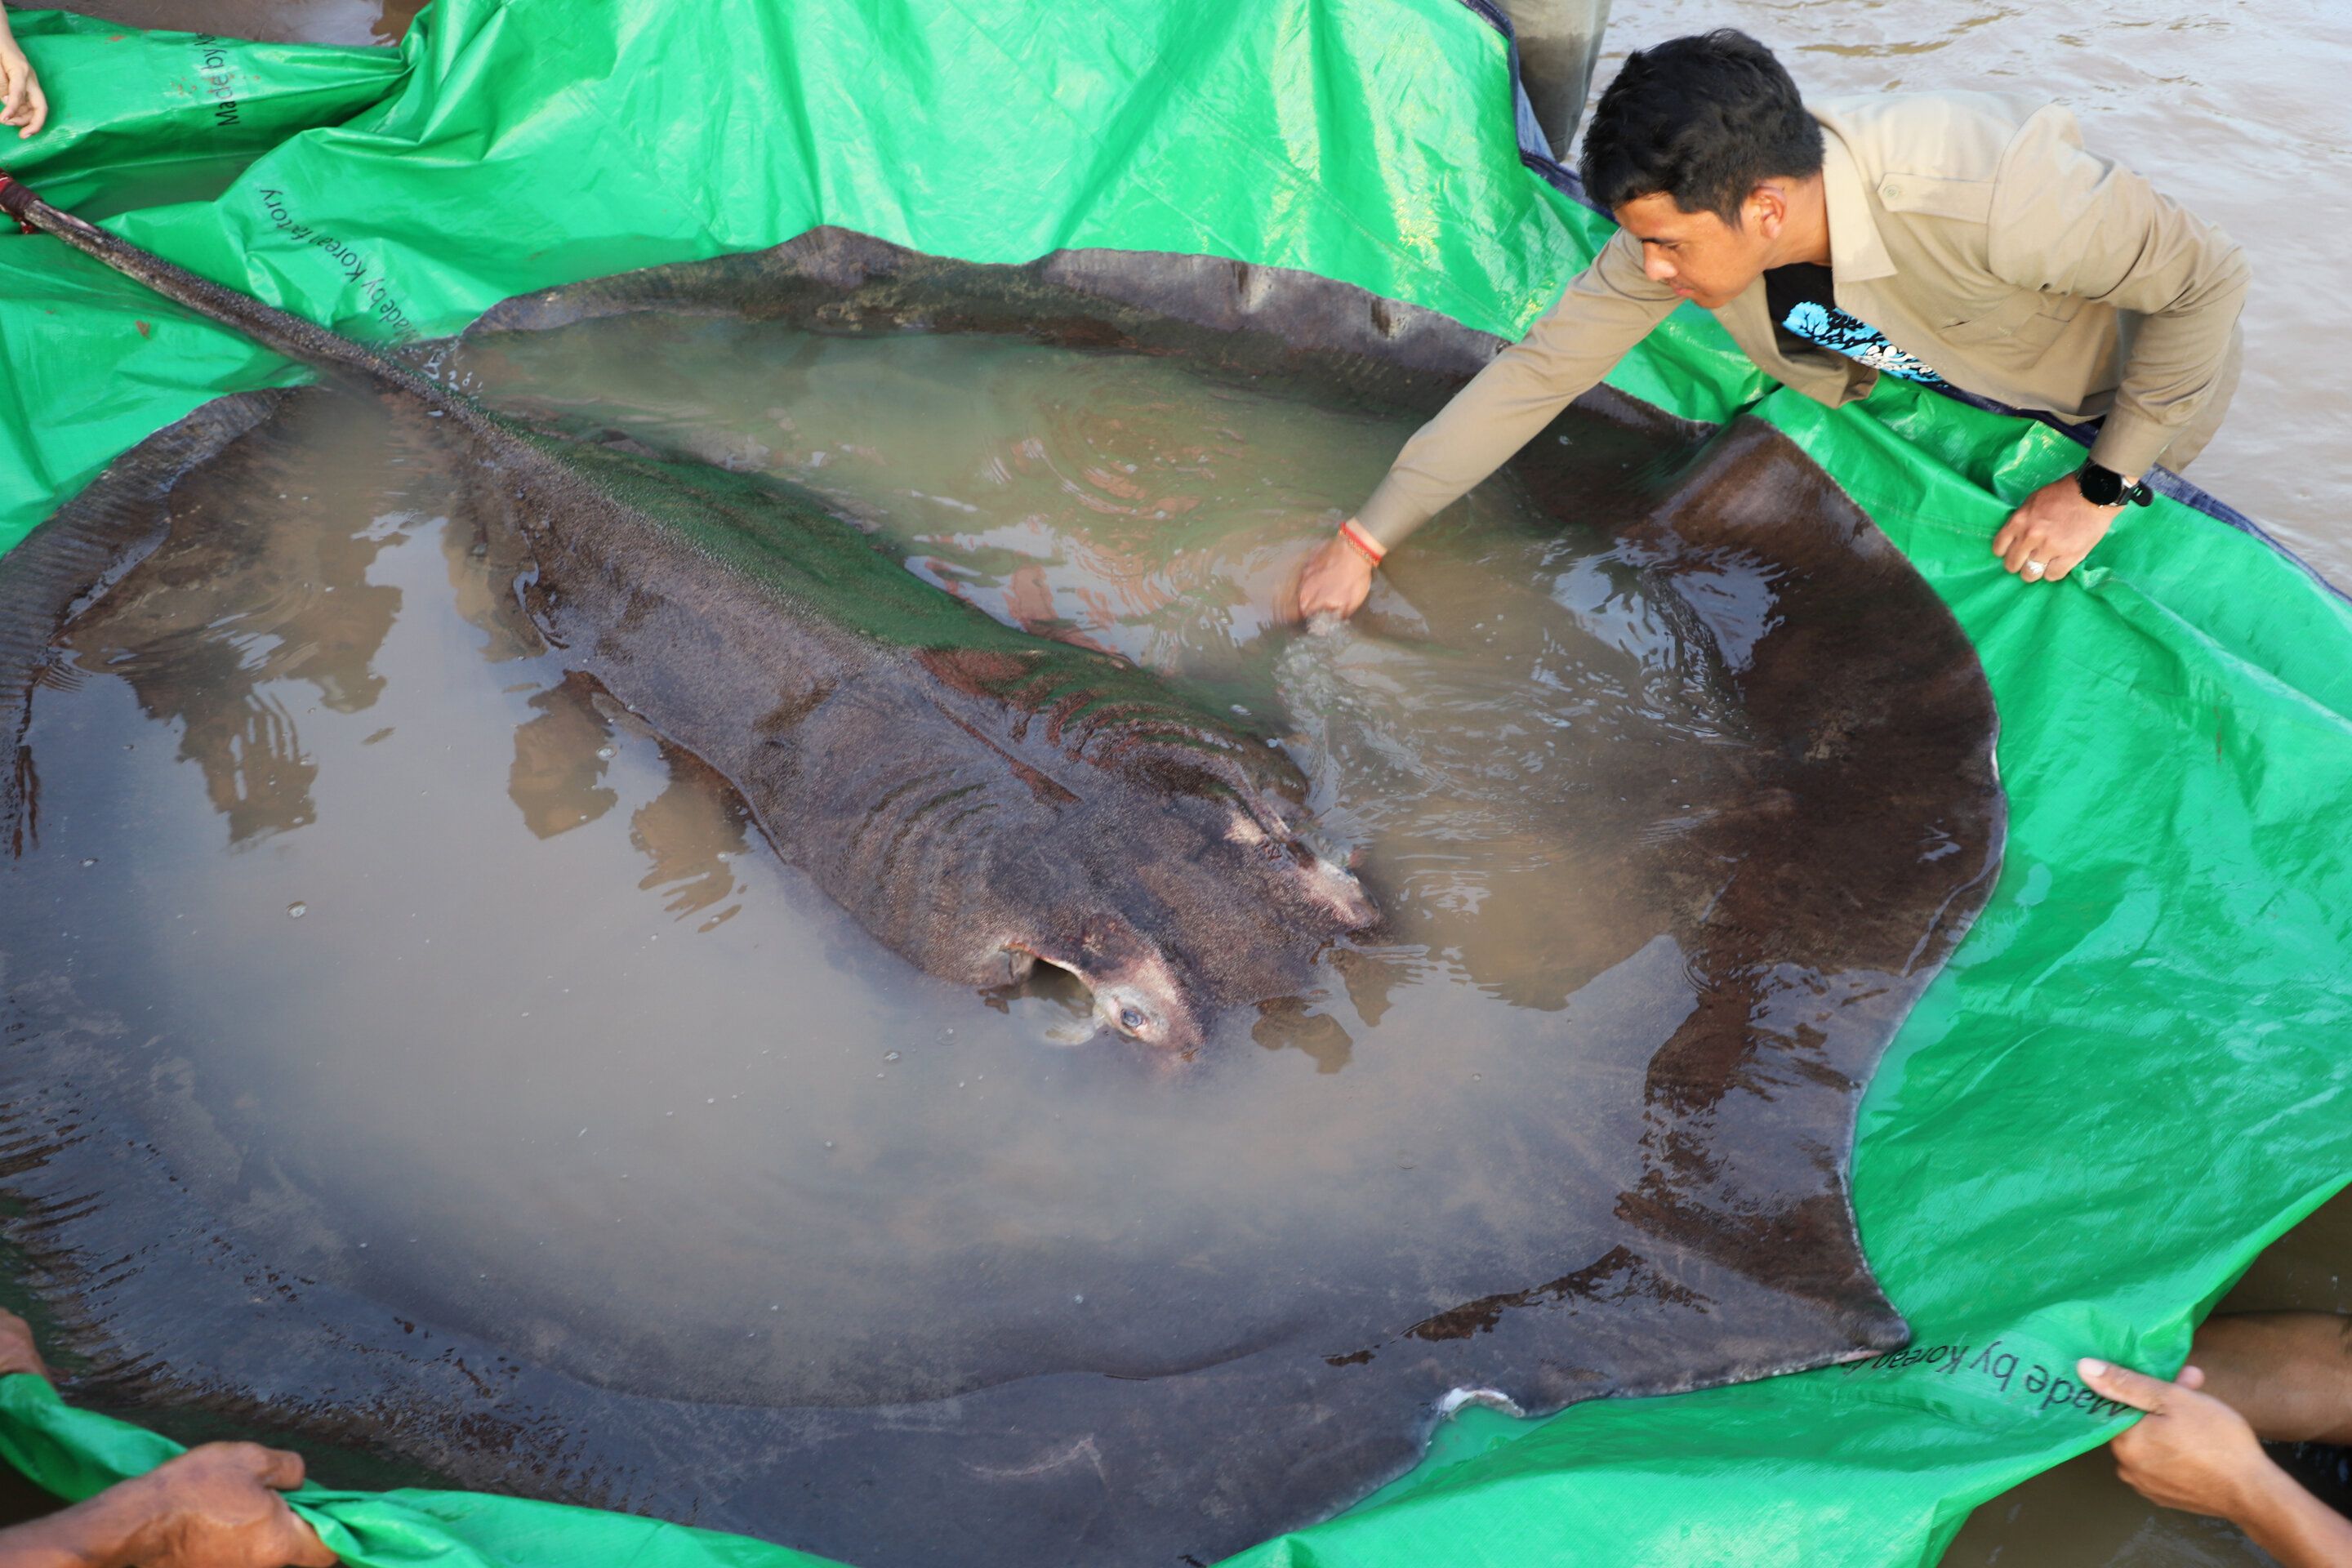 How the World's Largest Freshwater Fish Grew to 660 Pounds